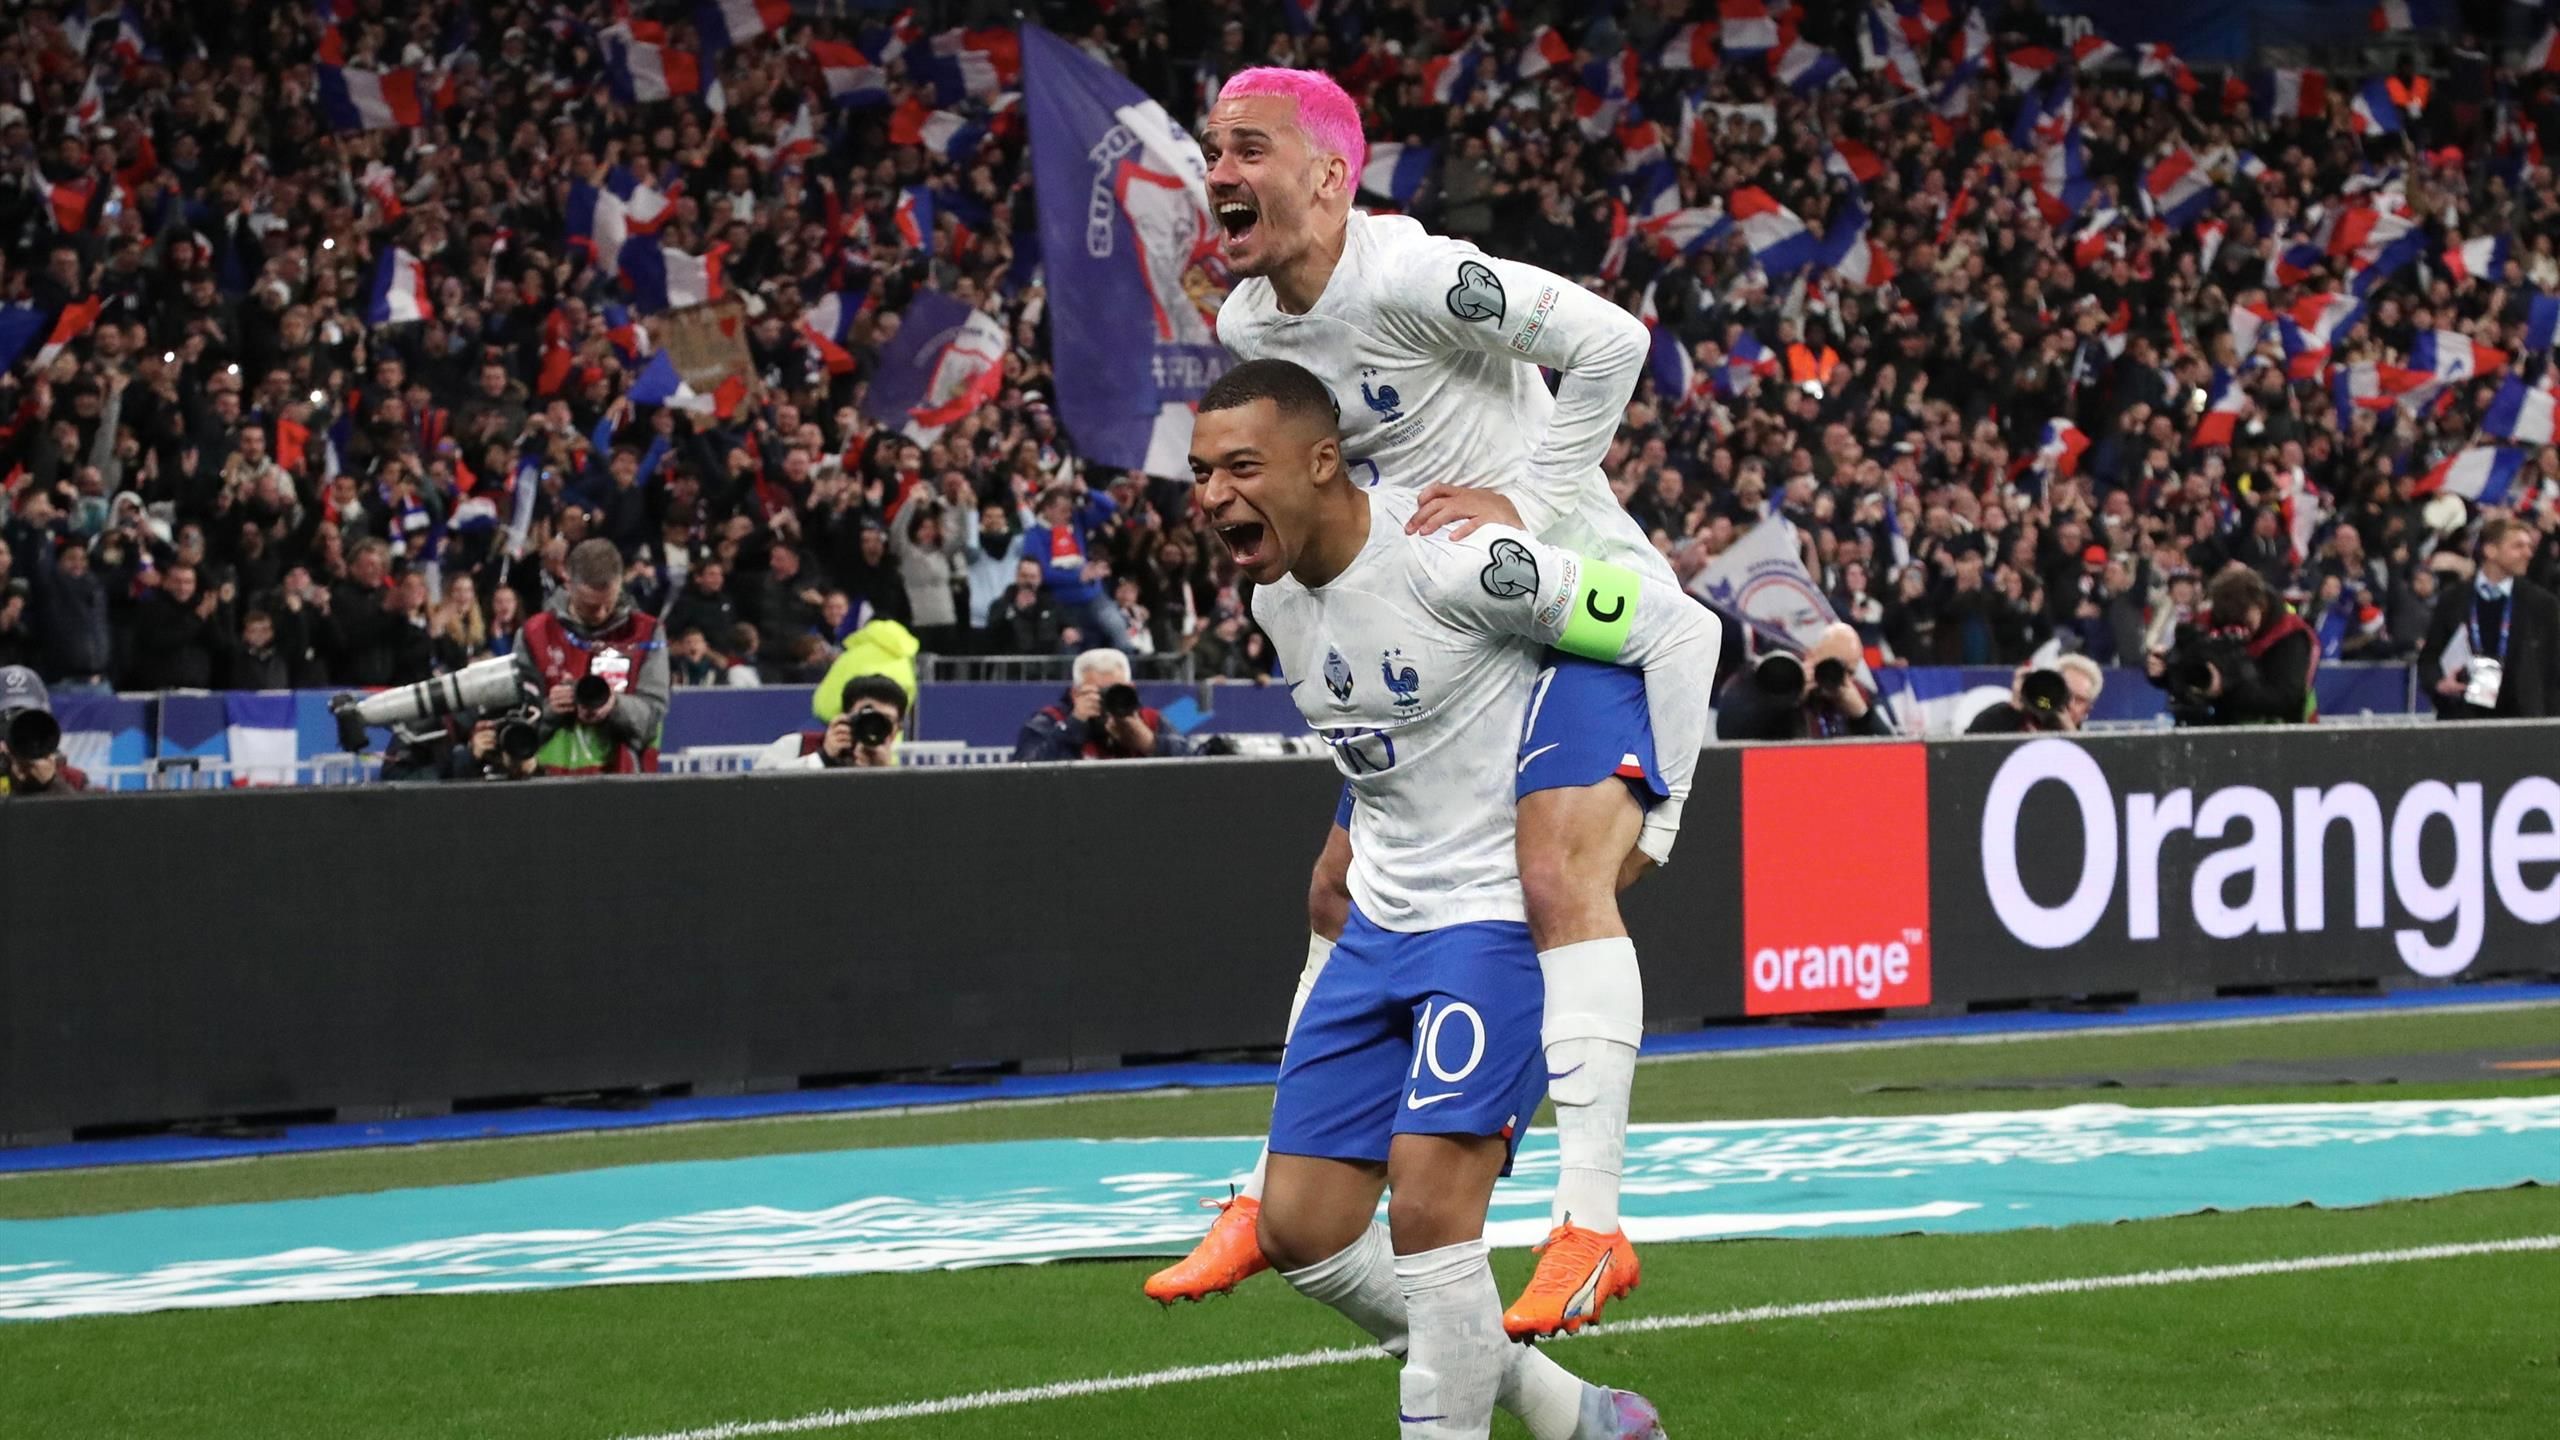 France Netherlands Kylian Mbappe Leads Les Bleus To Easy Win In First Match Of Euro